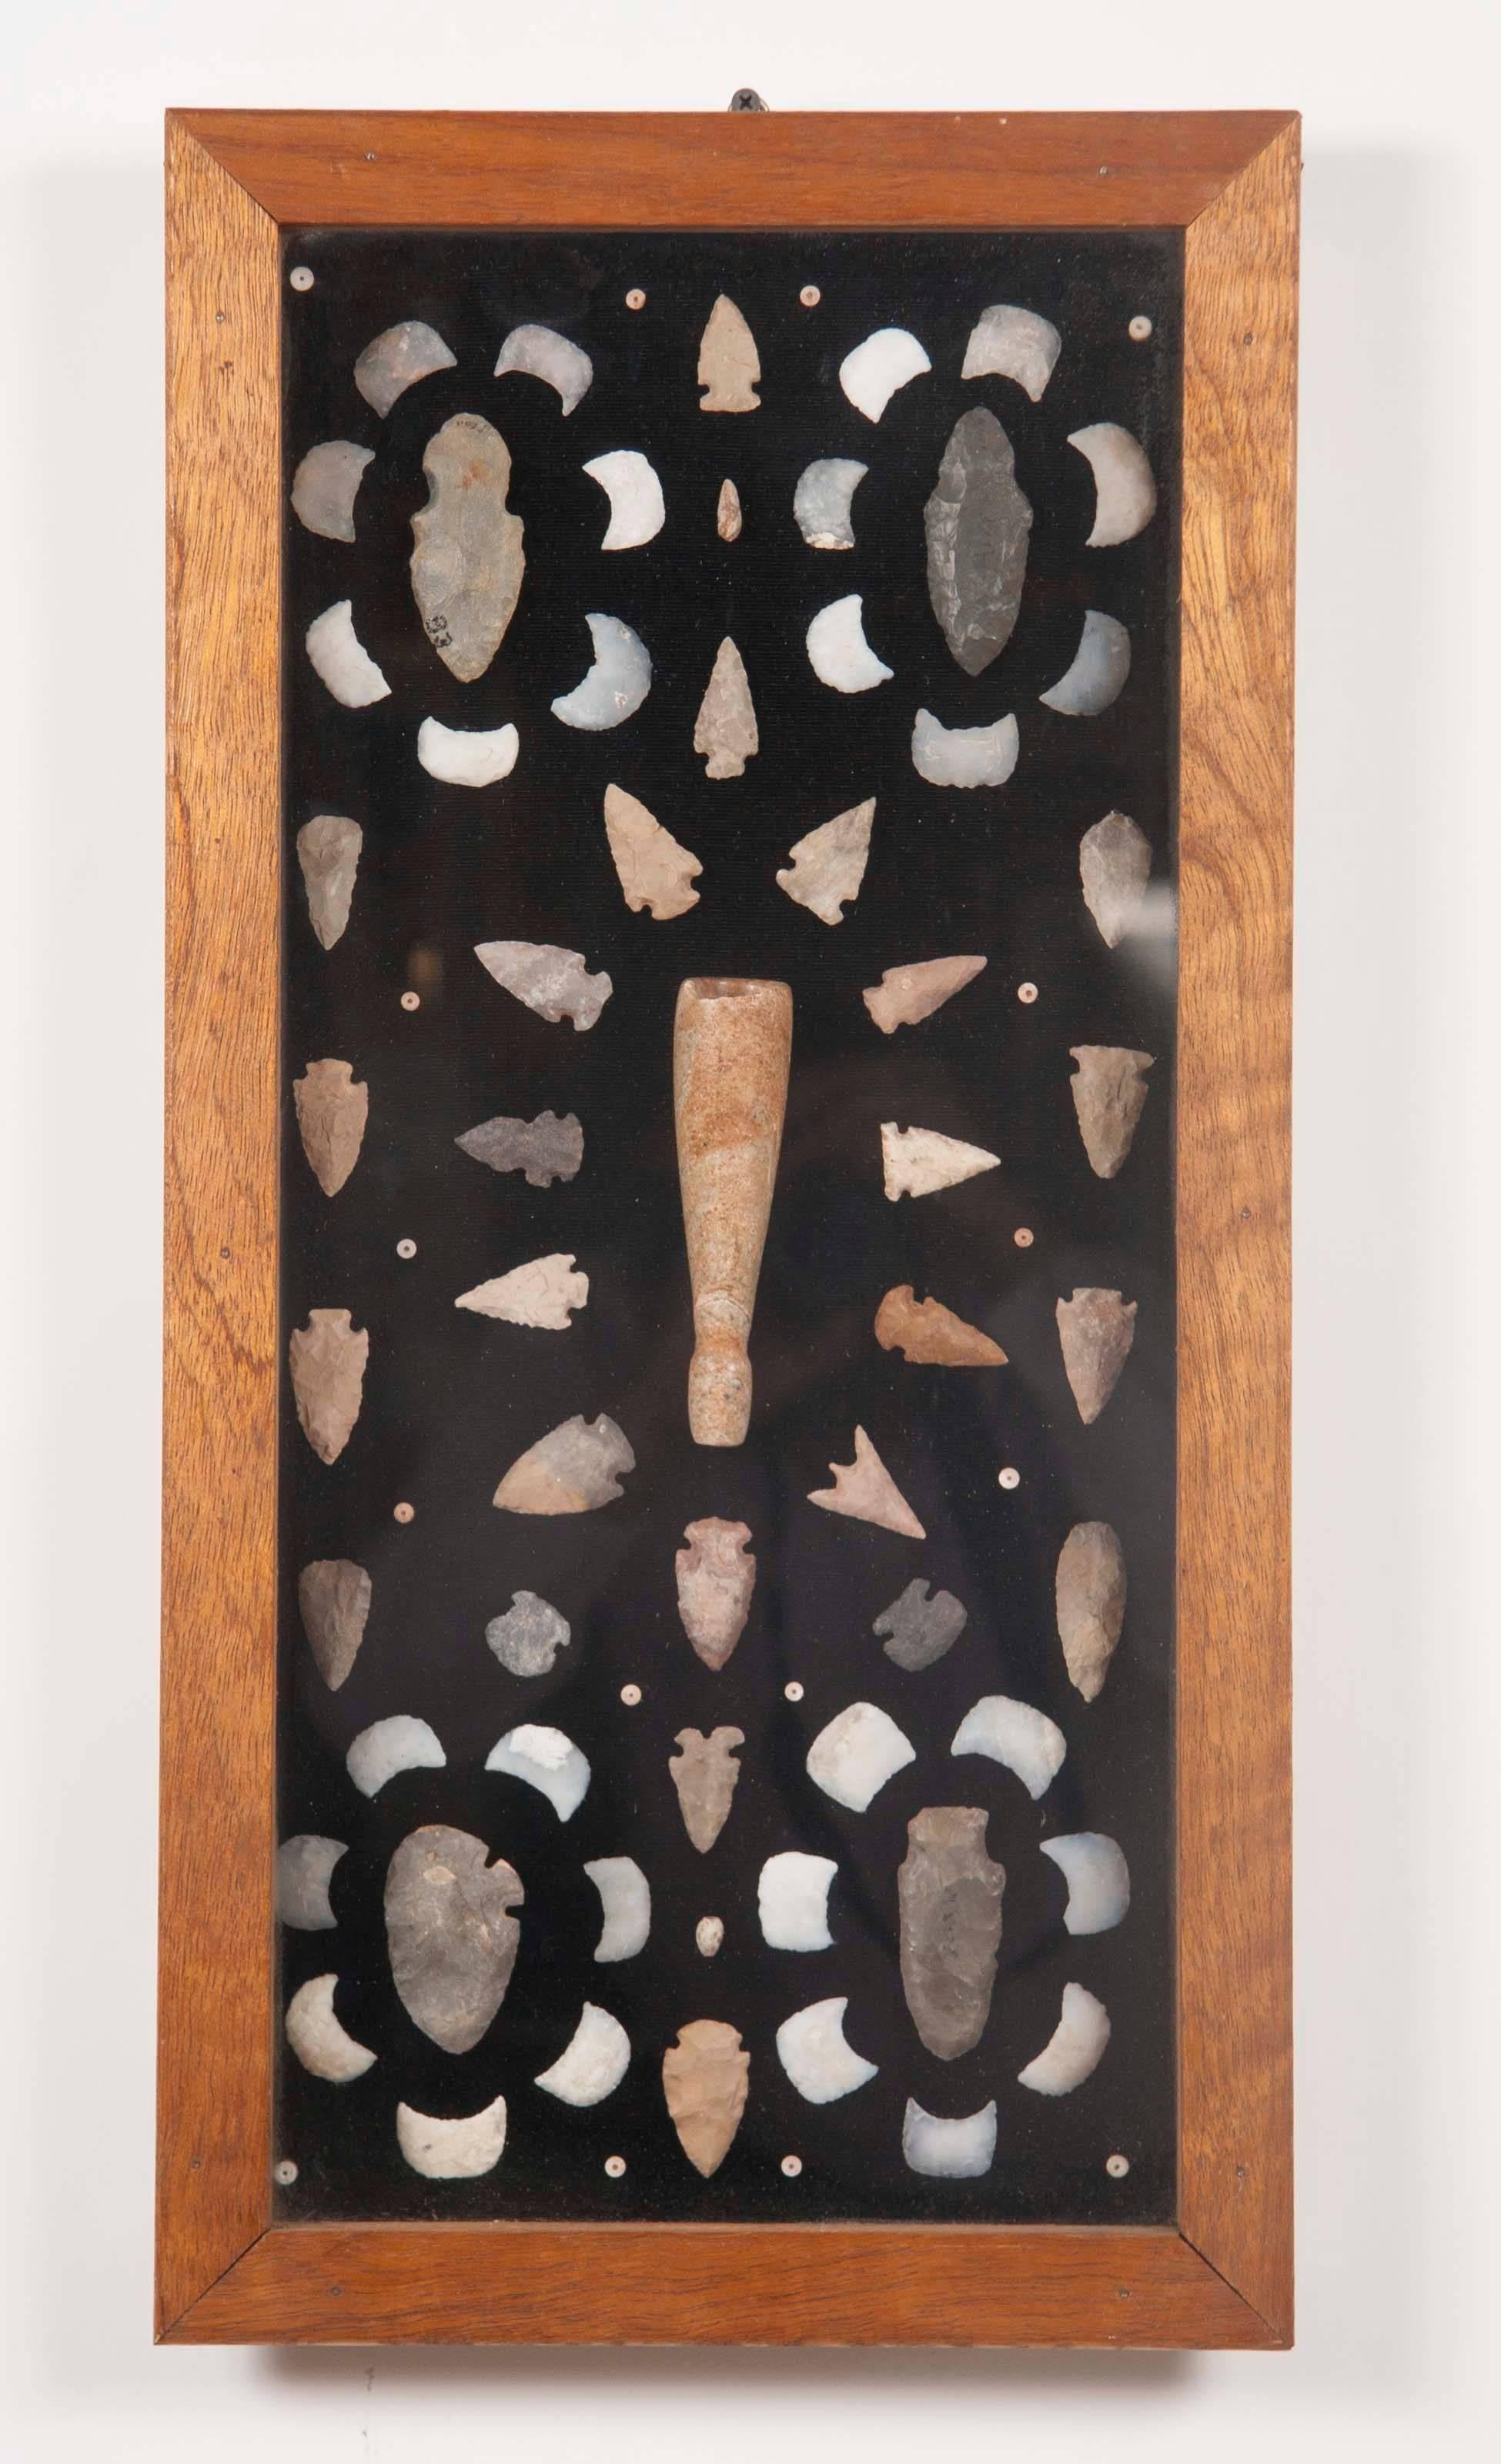 A pair of framed early American Indian arrowhead and other artifacts all from Western states.